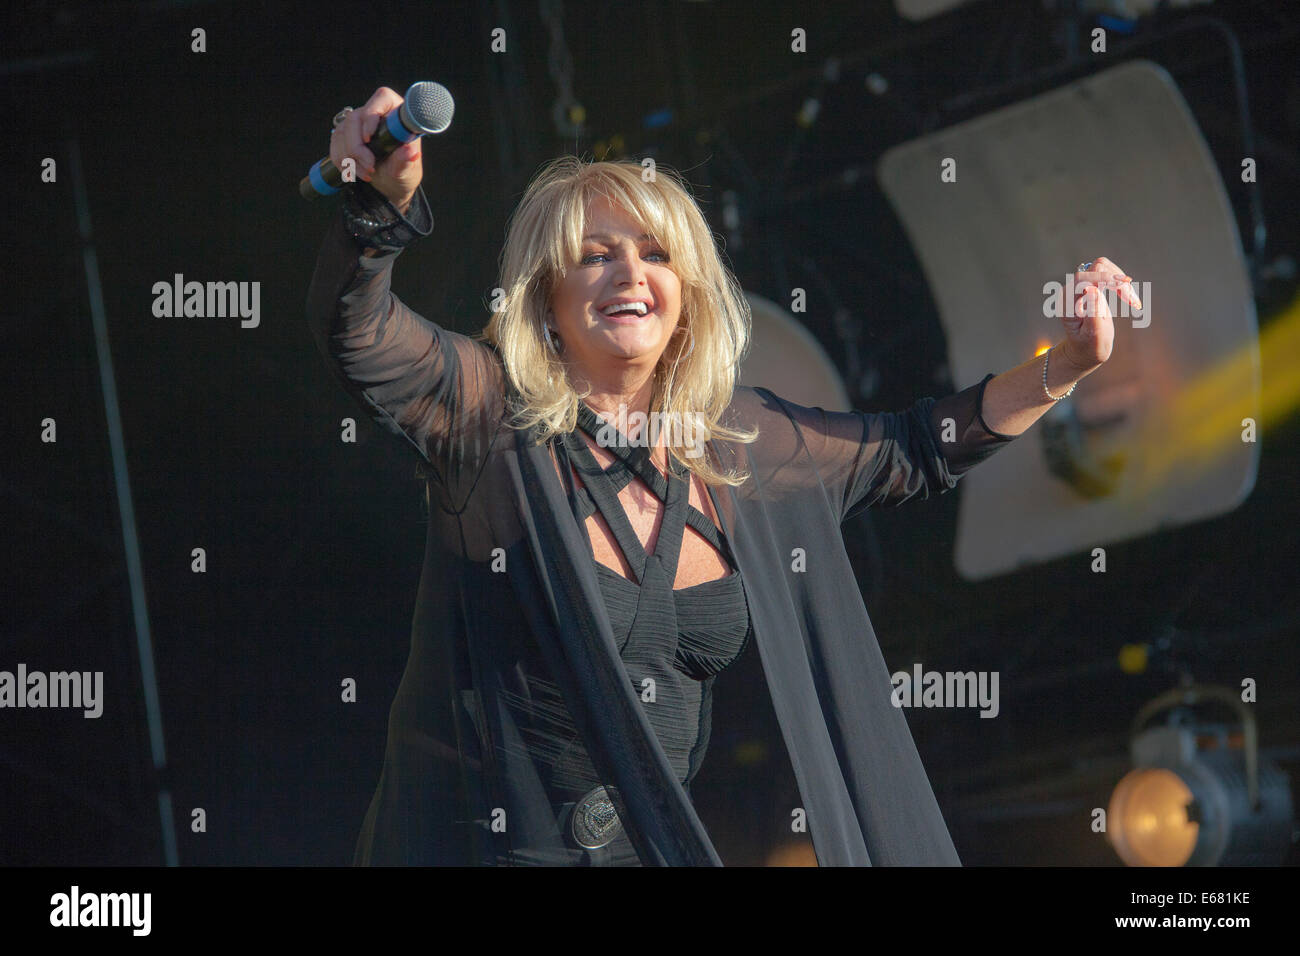 Remenham Henley-on-Thames Oxfordshire UK. 17 August 2014. Singer BONNIE TYLER performs on-stage at the 2014 'Rewind South Festival' held 15-16-17 August 2014. Photograph Credit:  2014 John Henshall / Alamy Live News. PER0419 Stock Photo